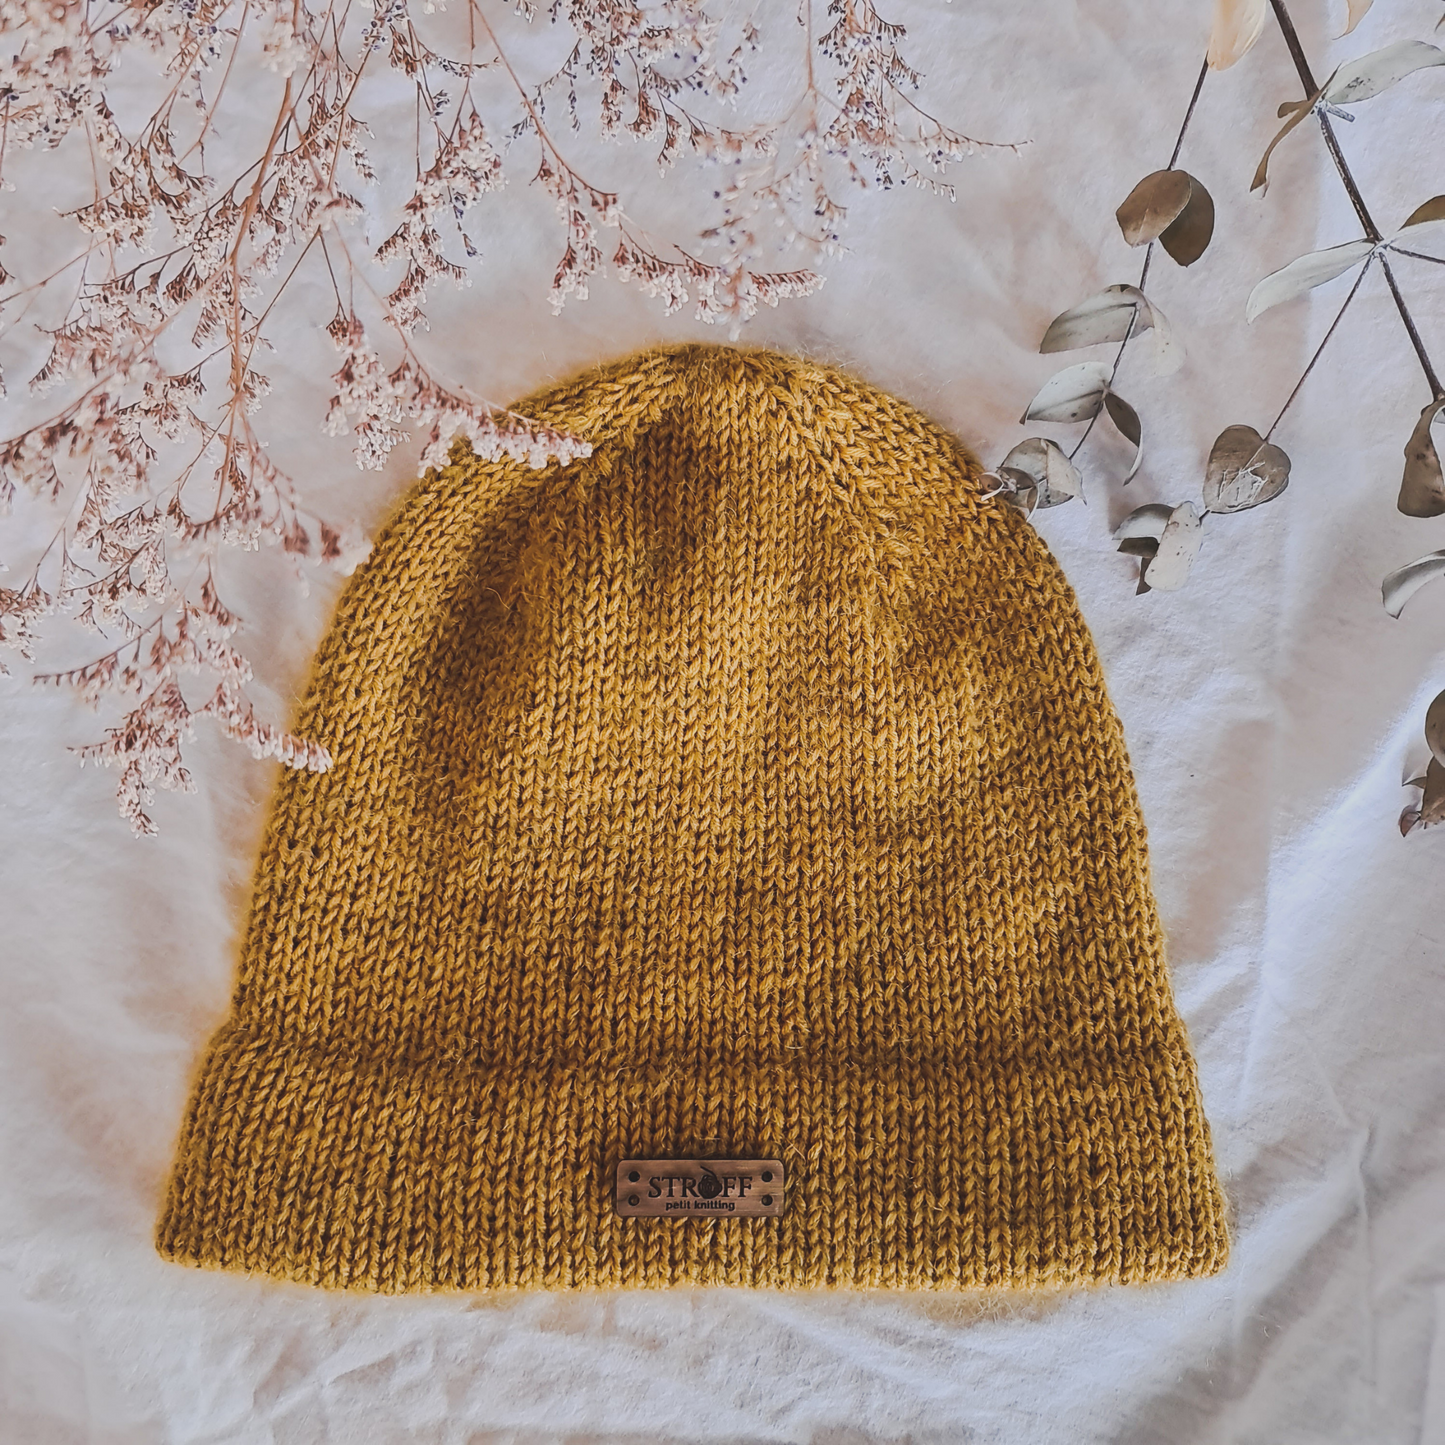 Tempest - beanie for children and adults